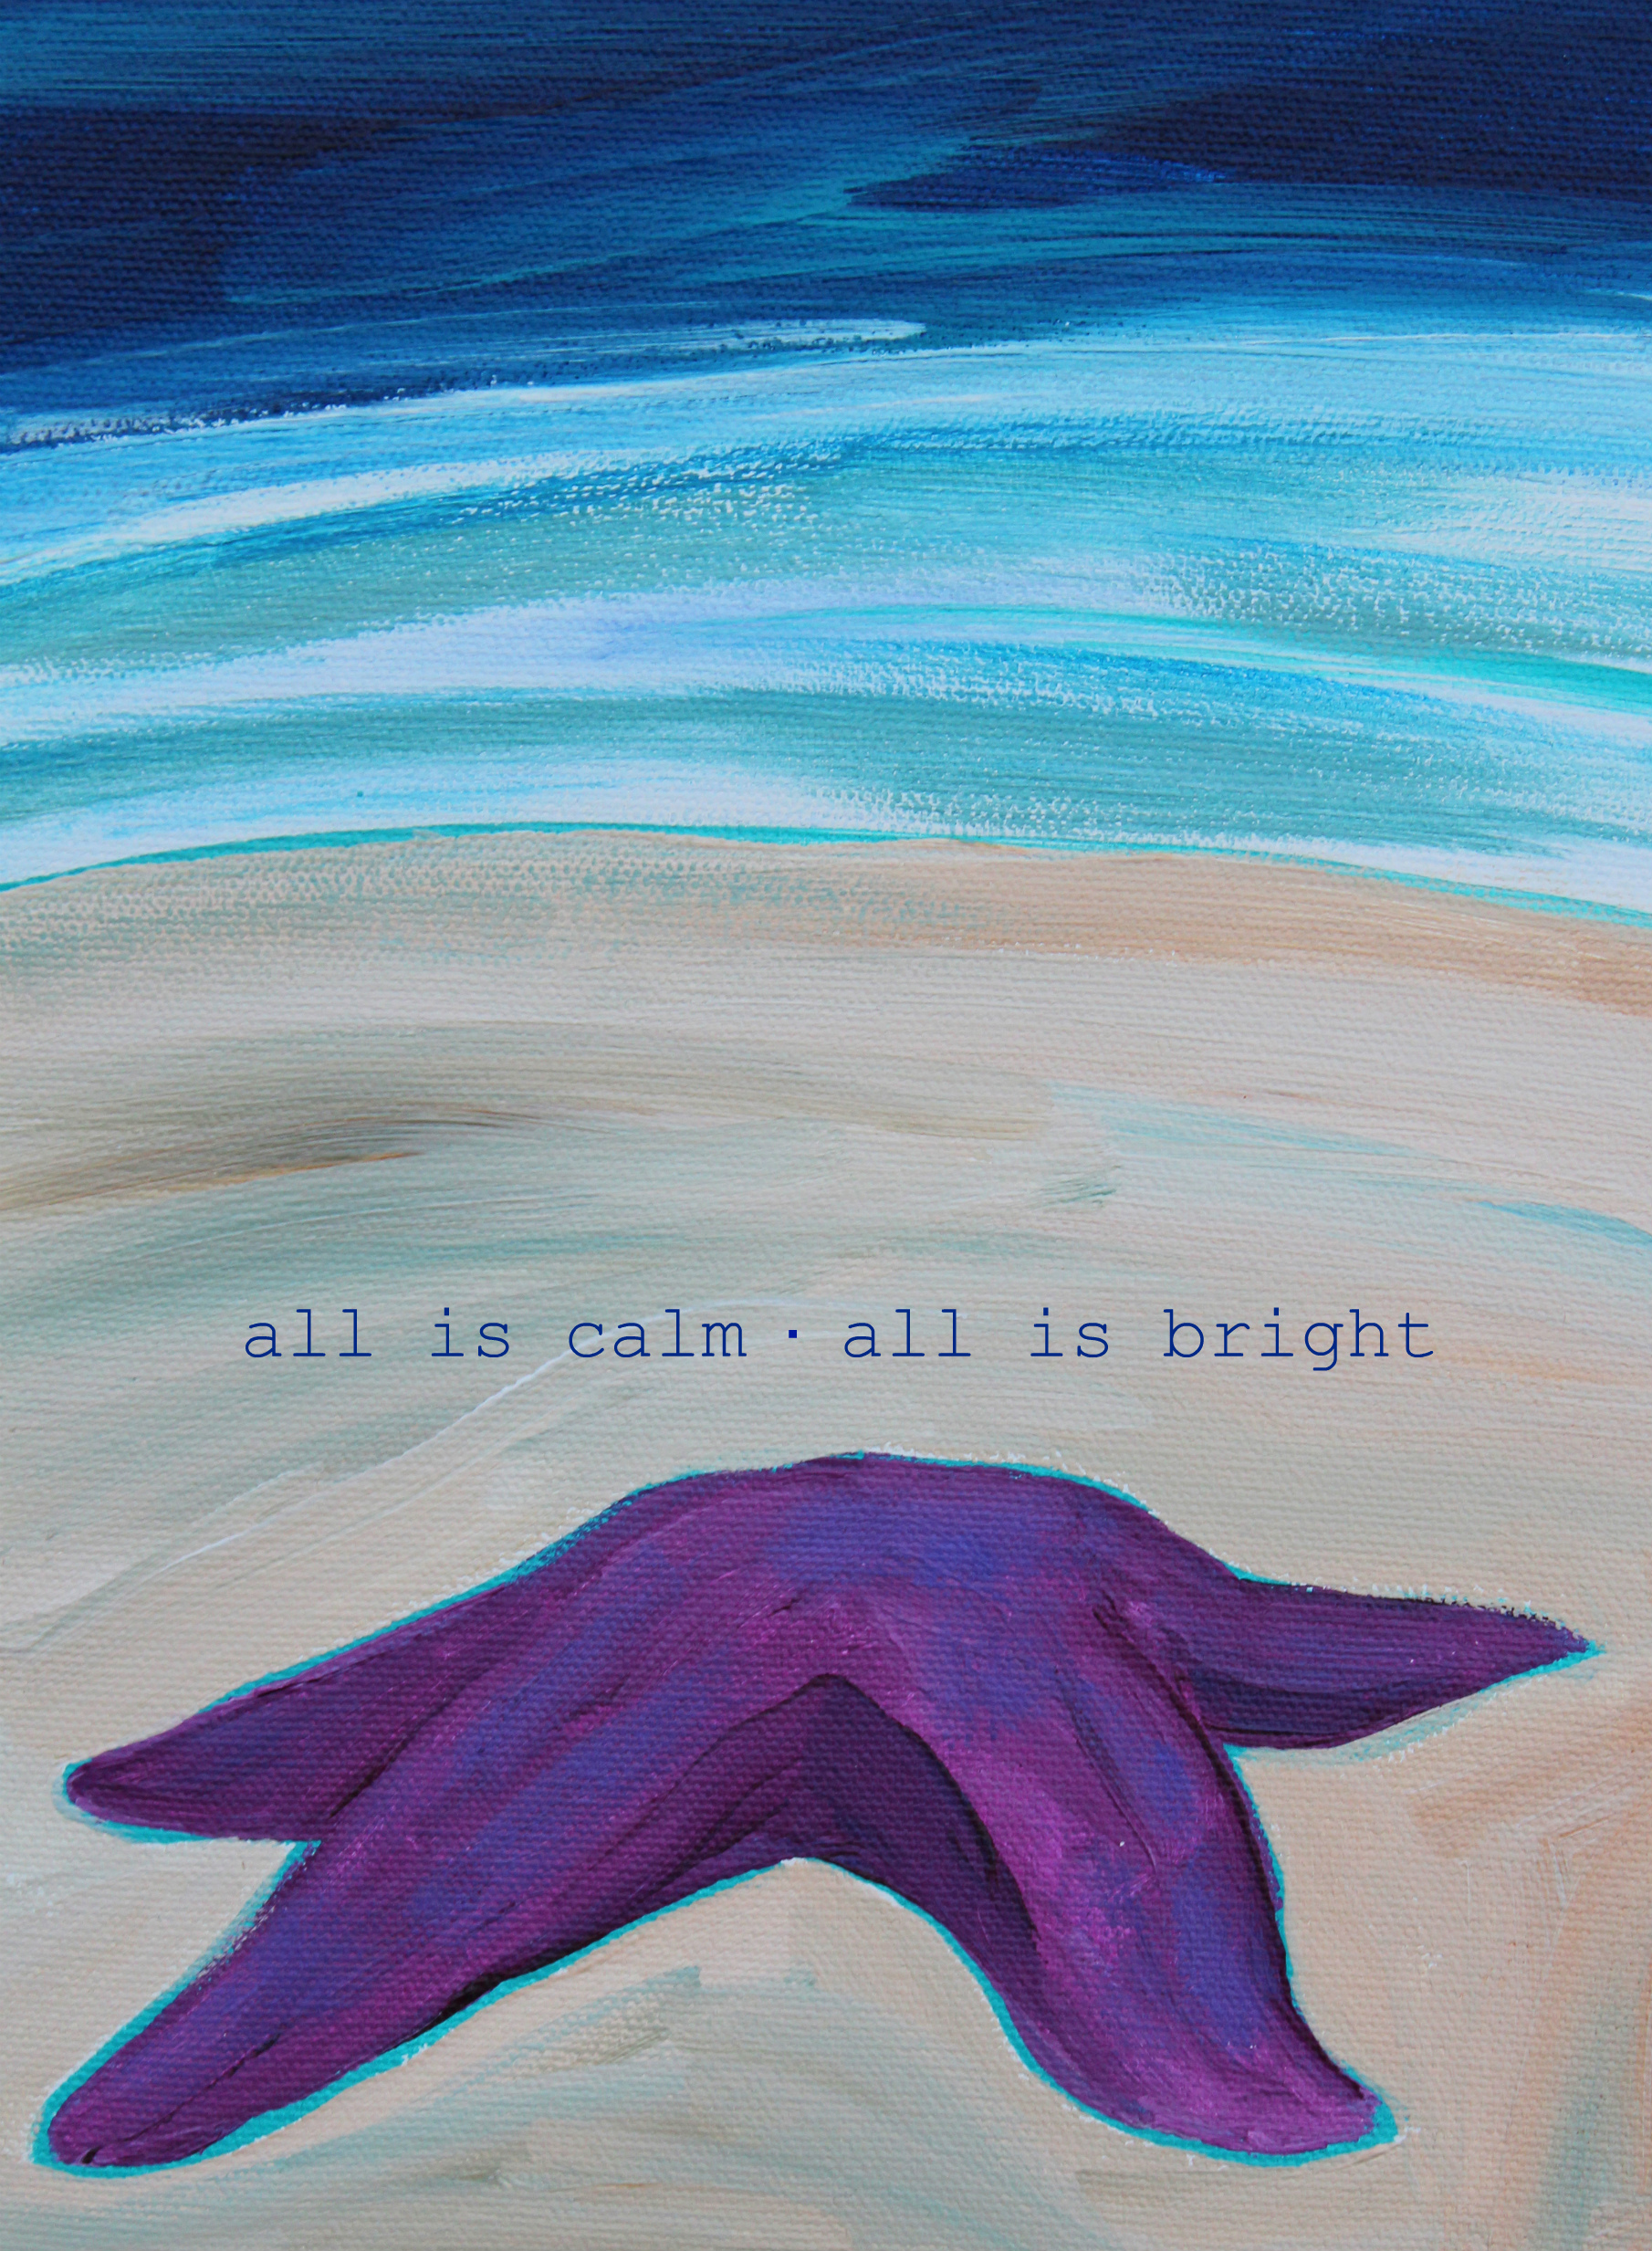 calm and bright….getting in the mood | Christy Wilson's Studio